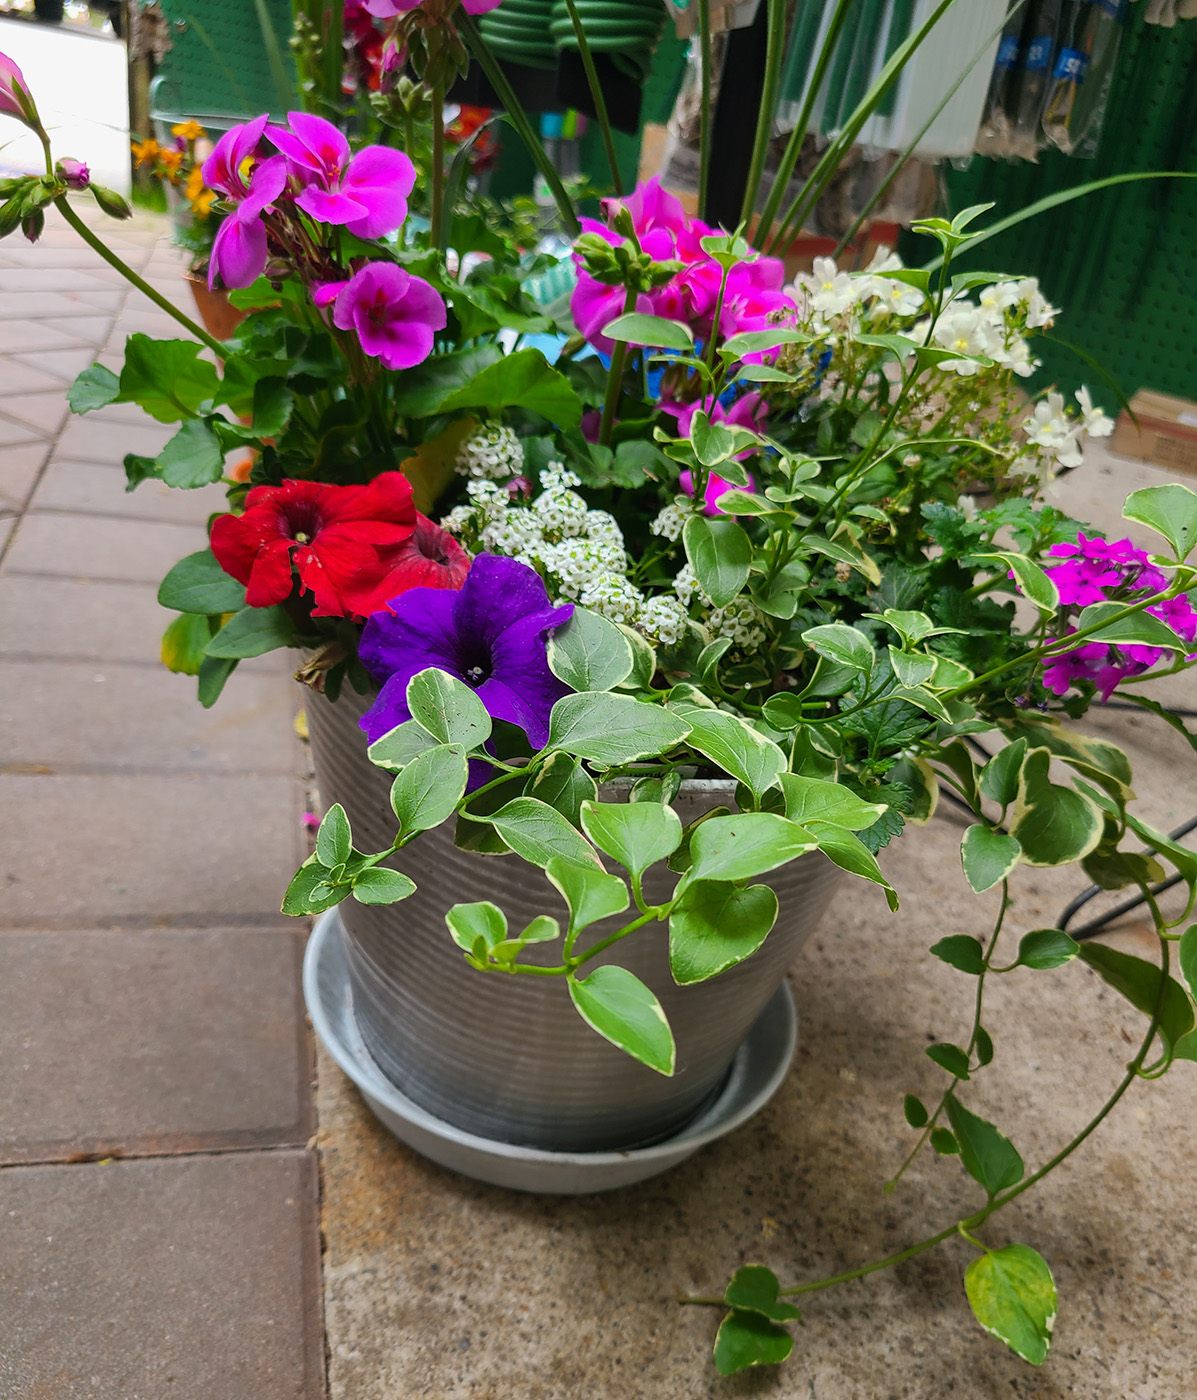 Custom Garden Containers at Goffle Brook Farms